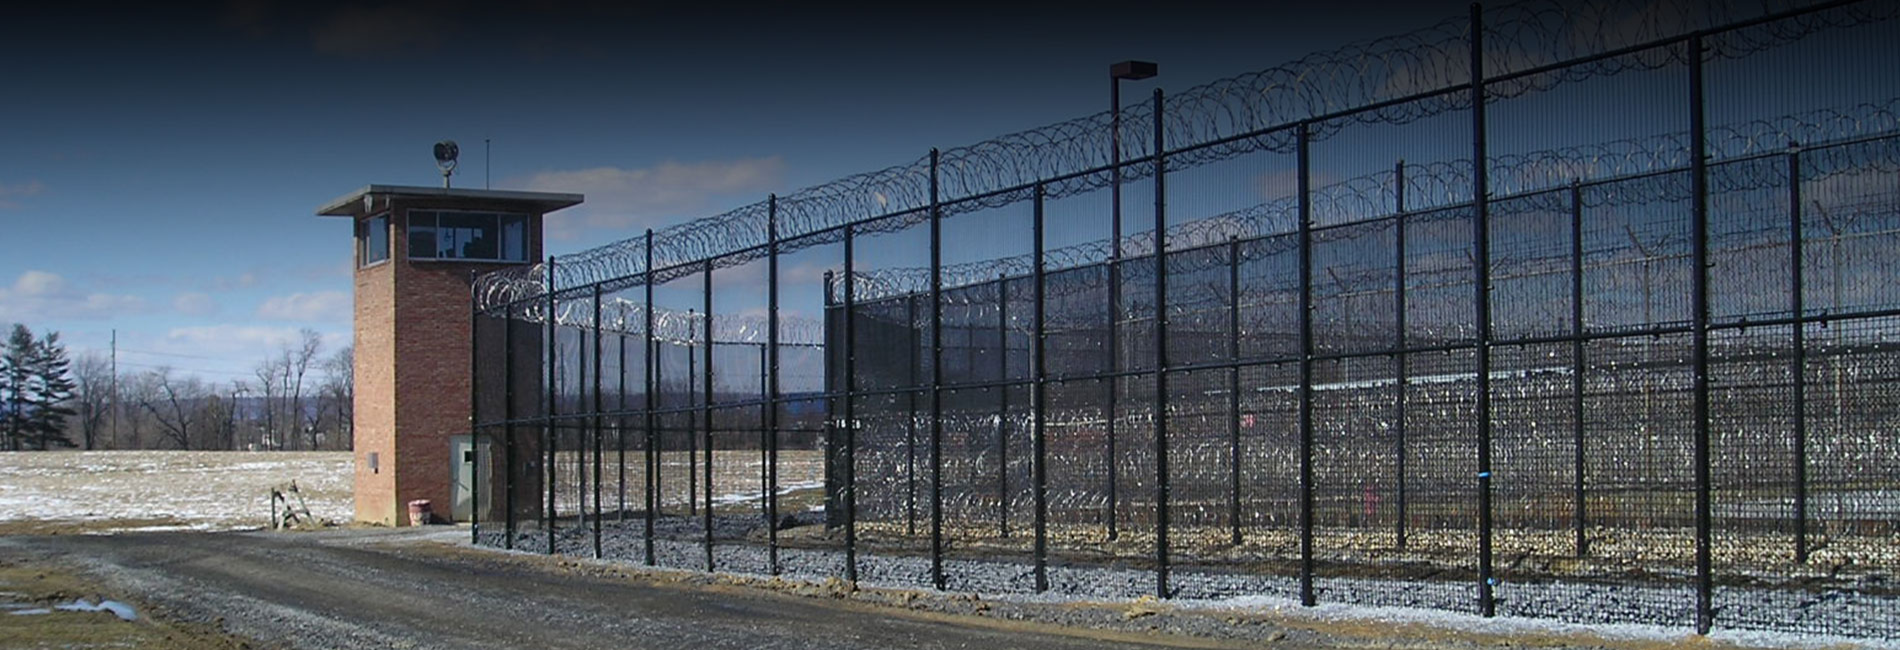 Black color coated security fence at a prison application